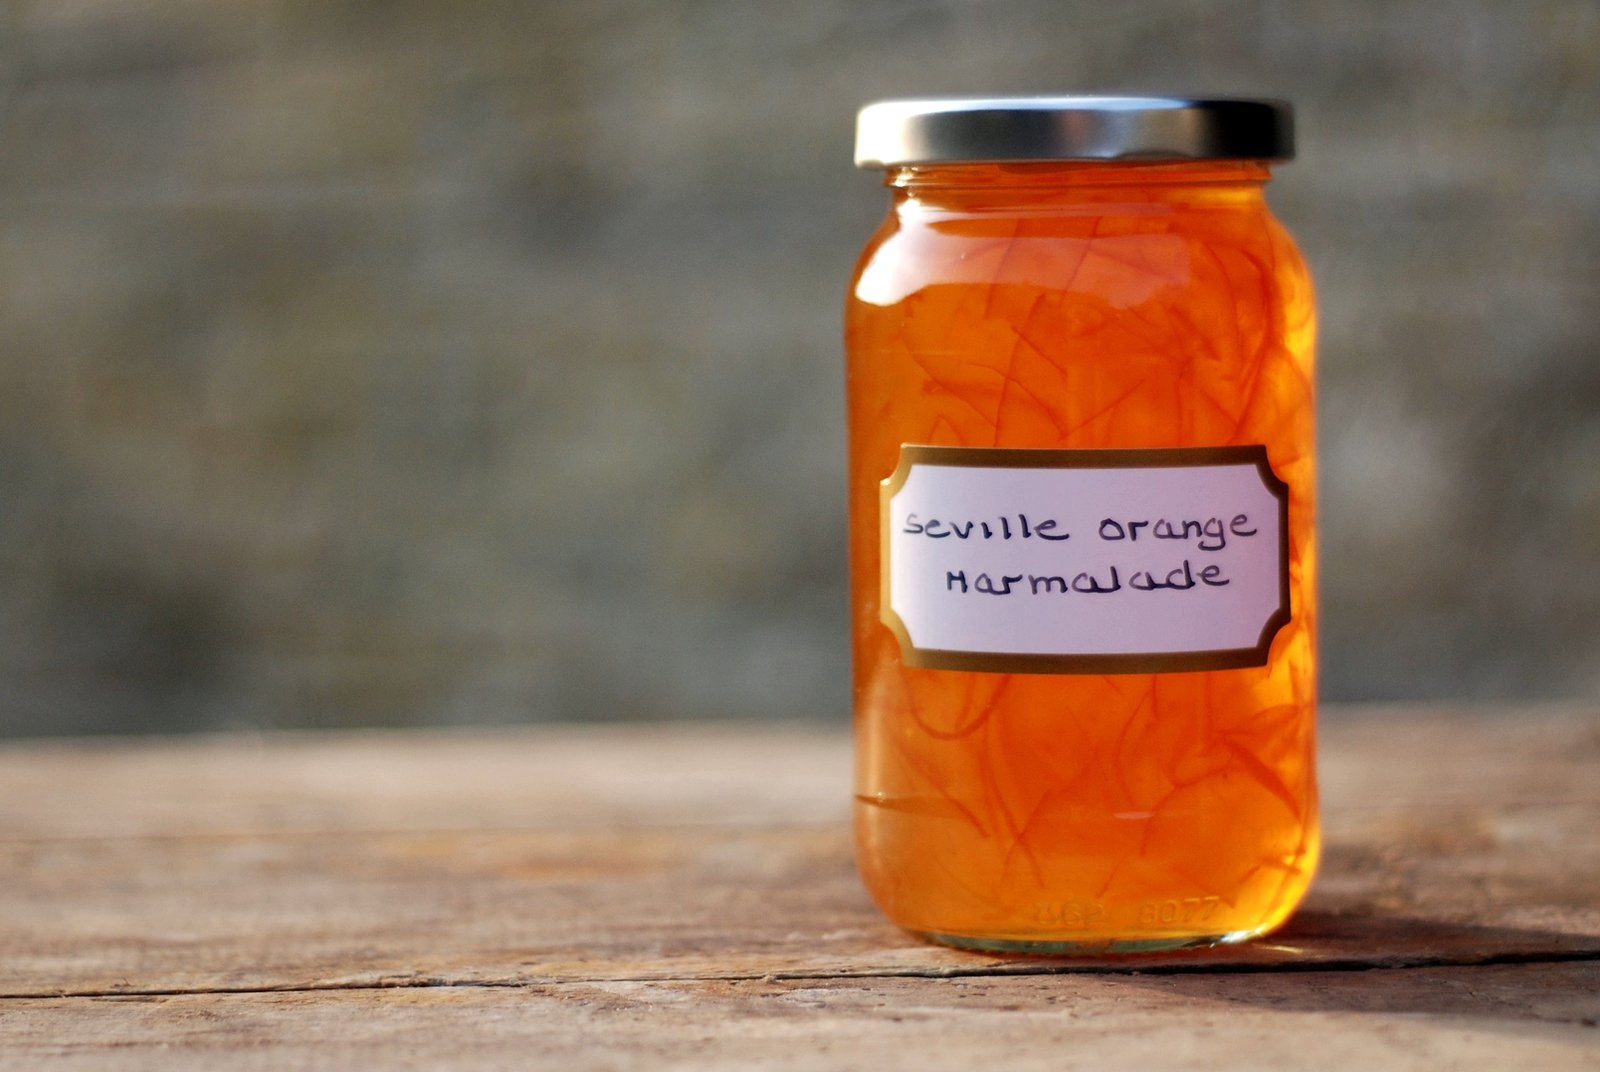 How to taste the Seville marmalade in Seville